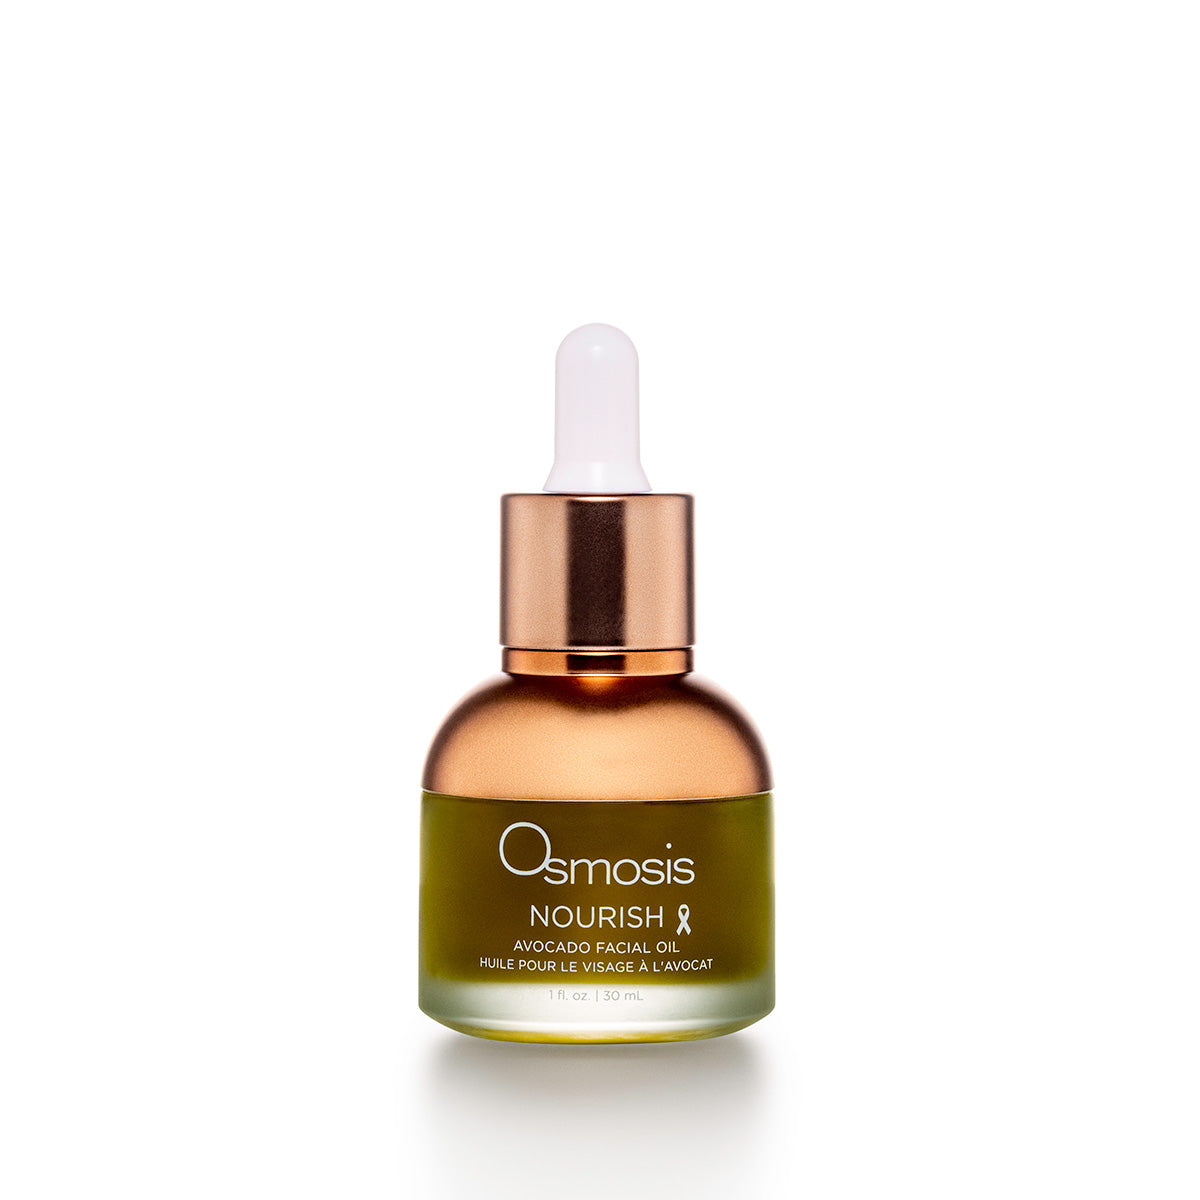 Osmosis Skincare Nourish Organic Facial Oil can be used by itself or added to a daily moisturizer to boost hydration.